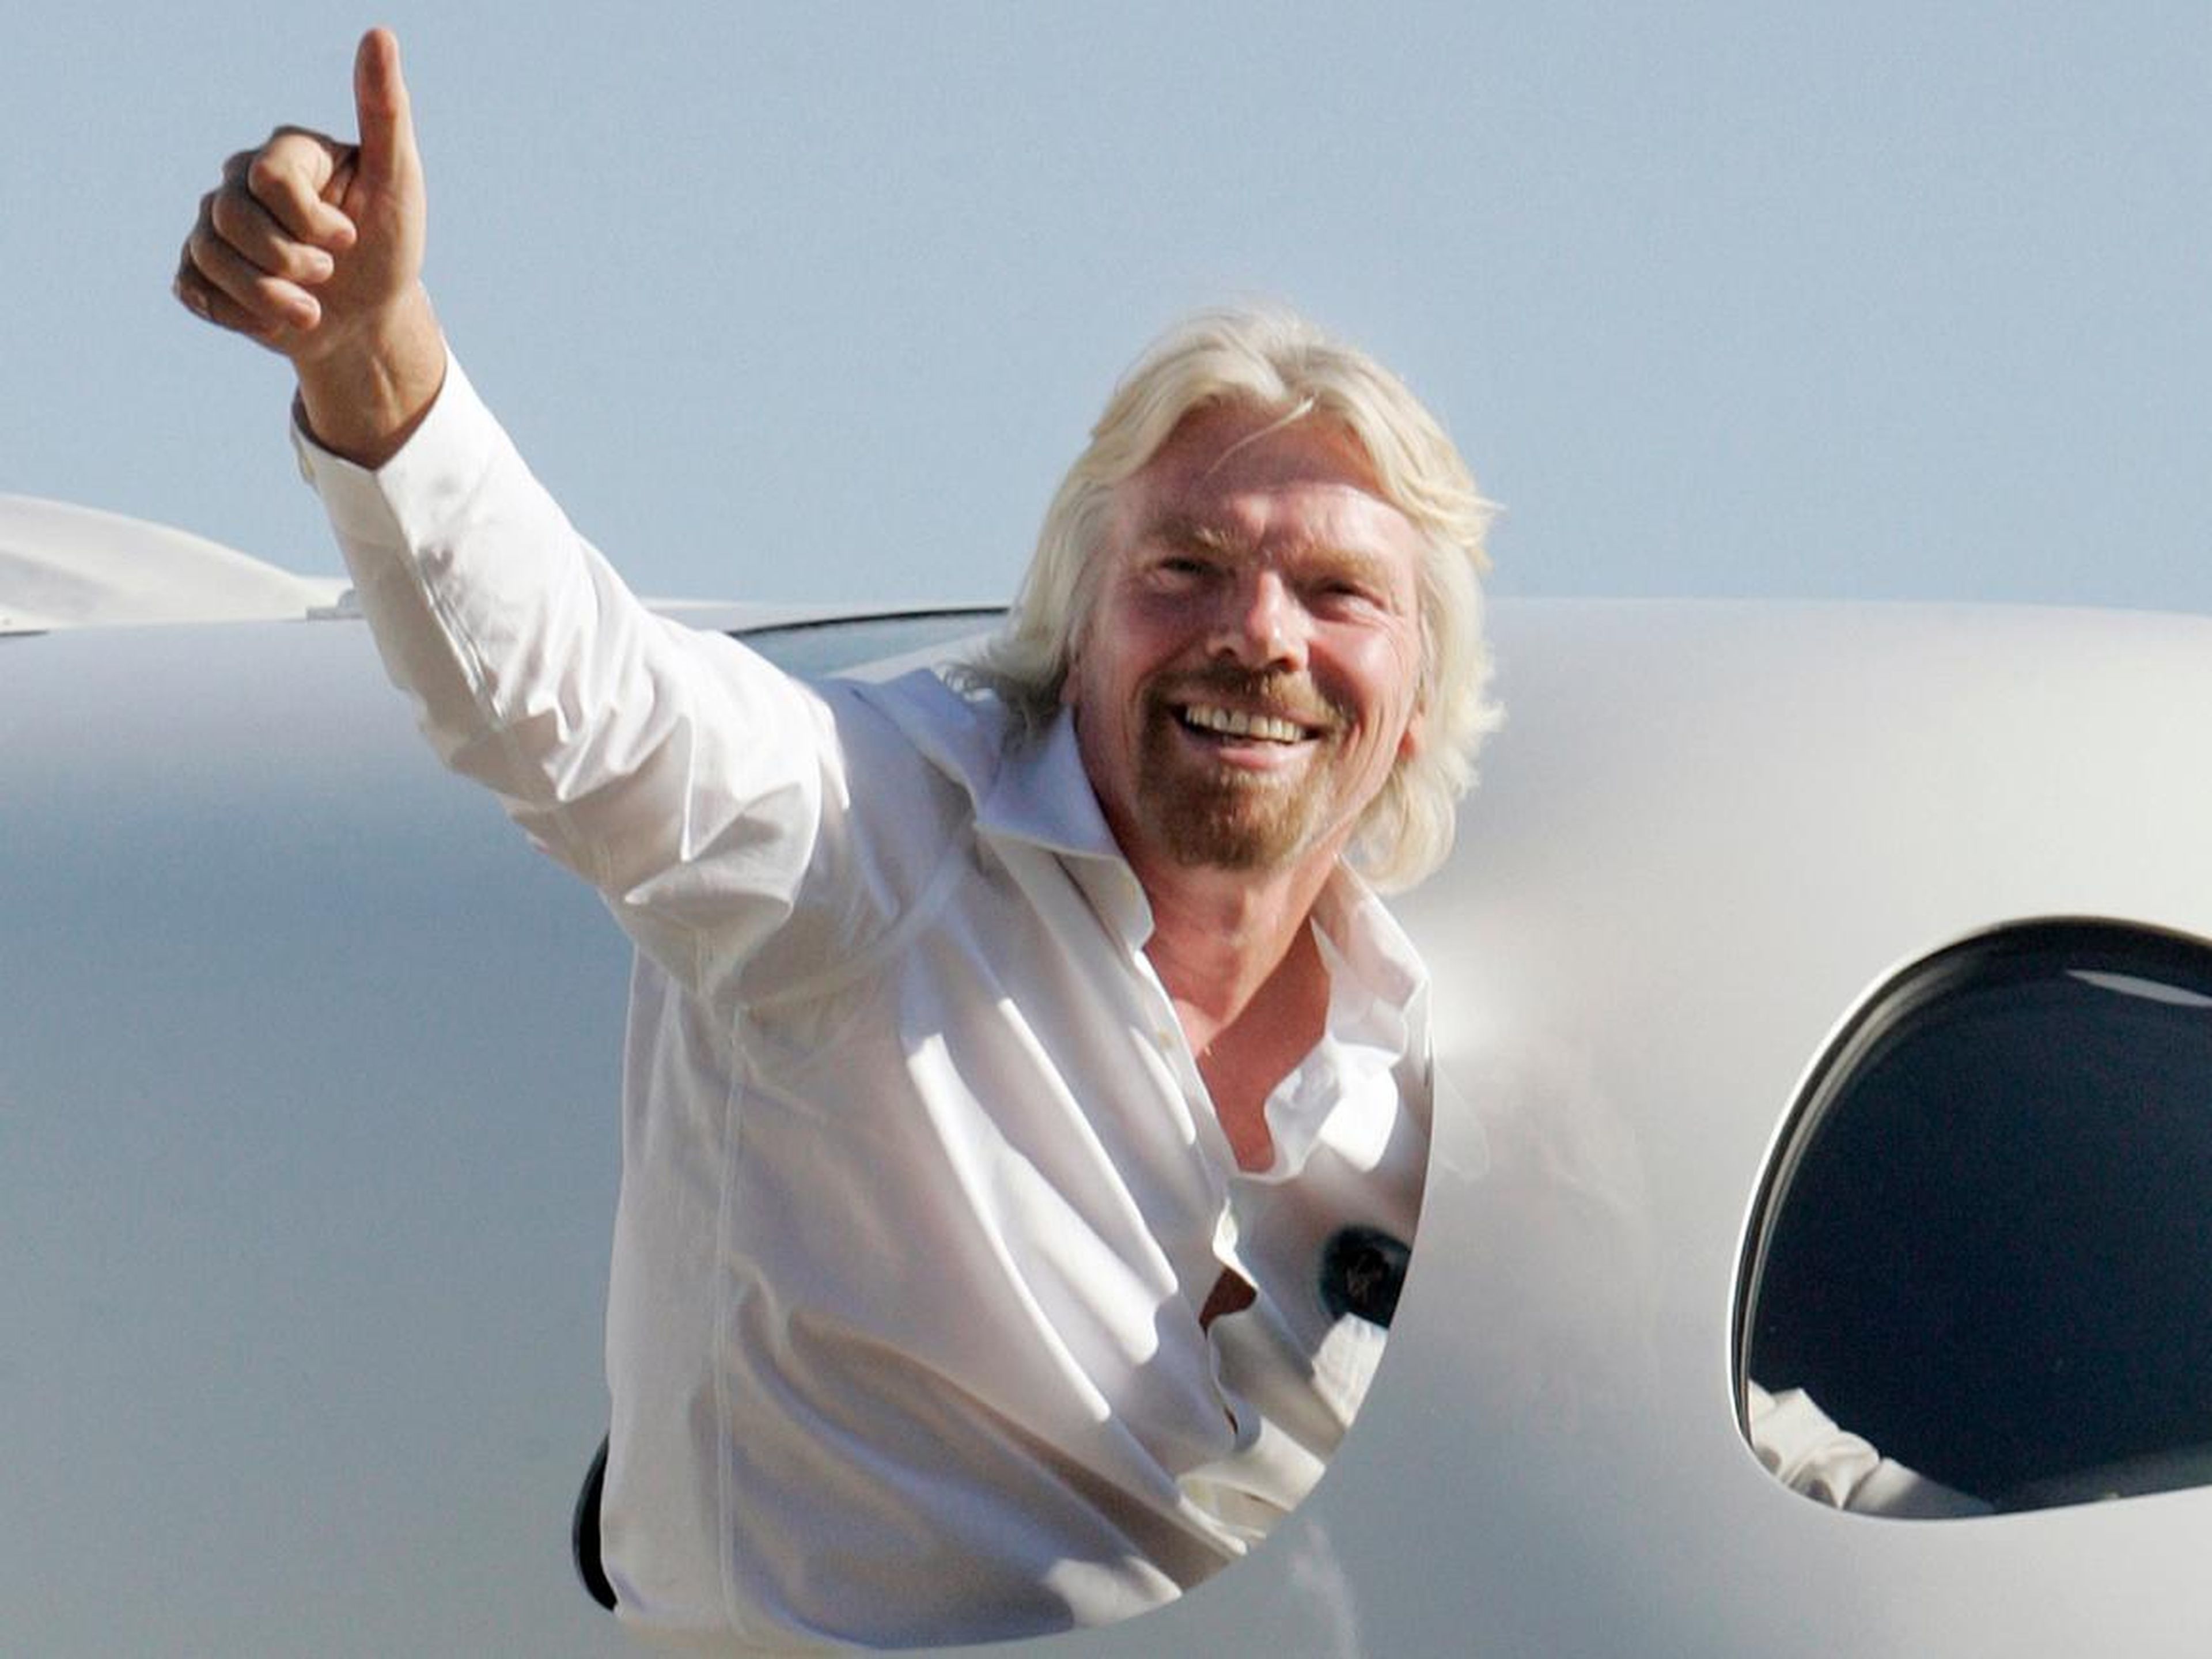 Branson said in May 2018 that Virgin Galactic was two or three test flights away from taking passengers to space.